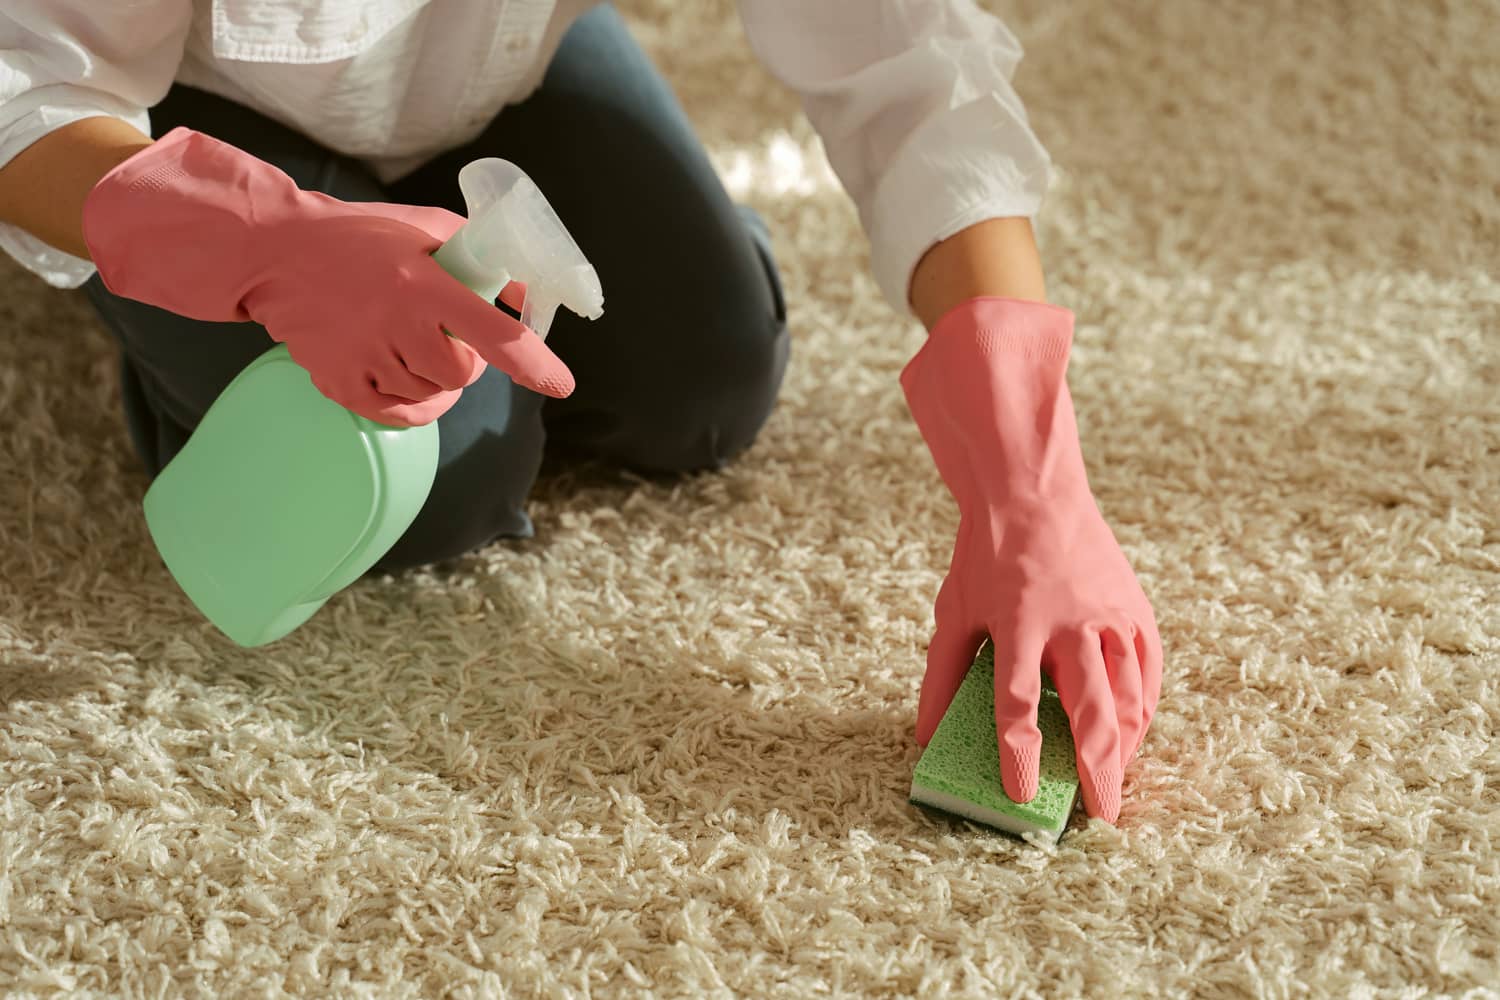 How To Get Play Doh Out Of Rug